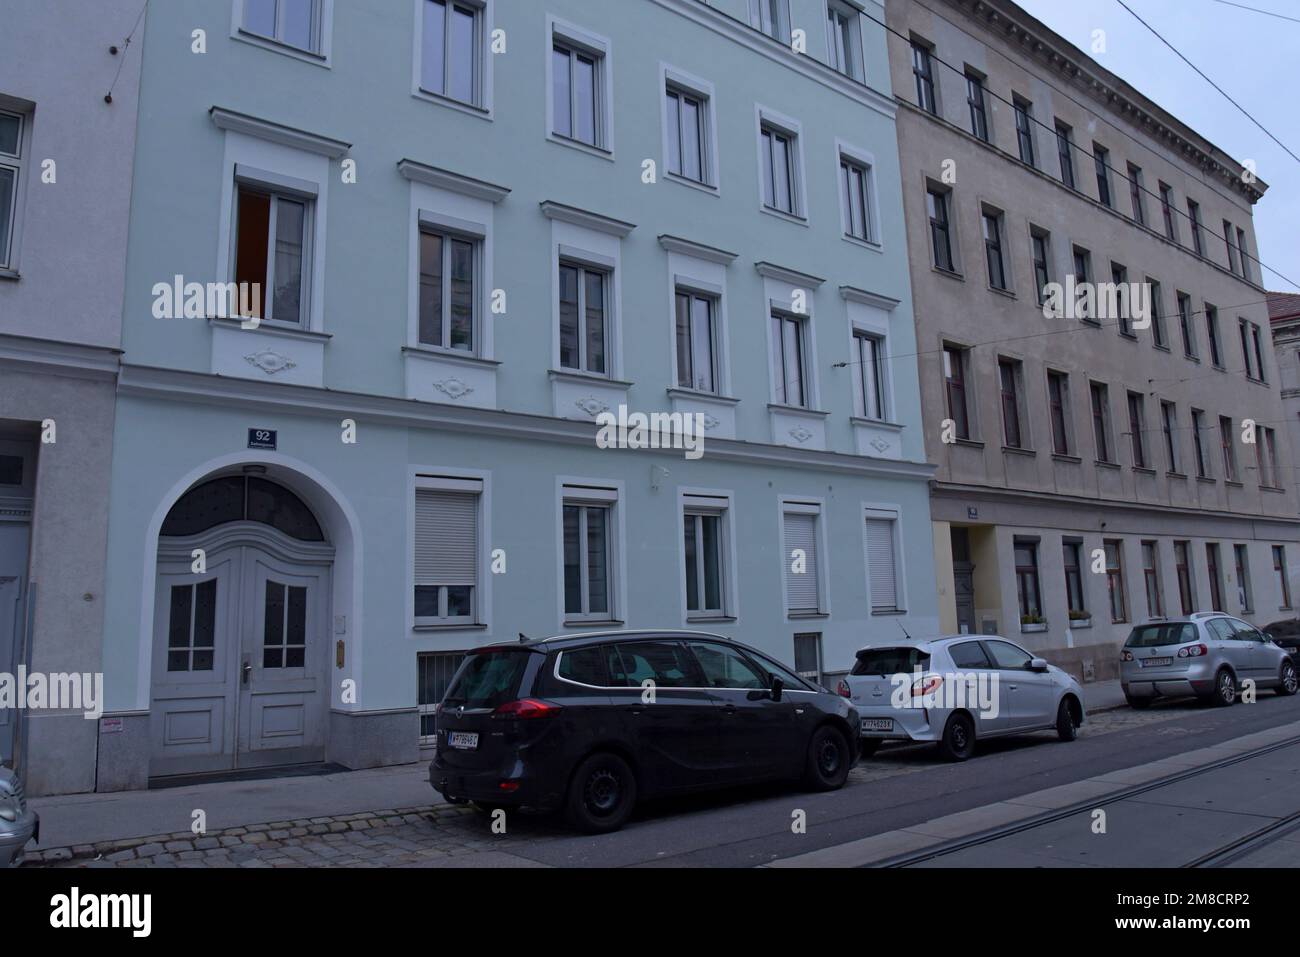 The Vienna apartment building used as the location for Kara Milovy's apartment in James Bond 007 film The Living Daylights Stock Photo